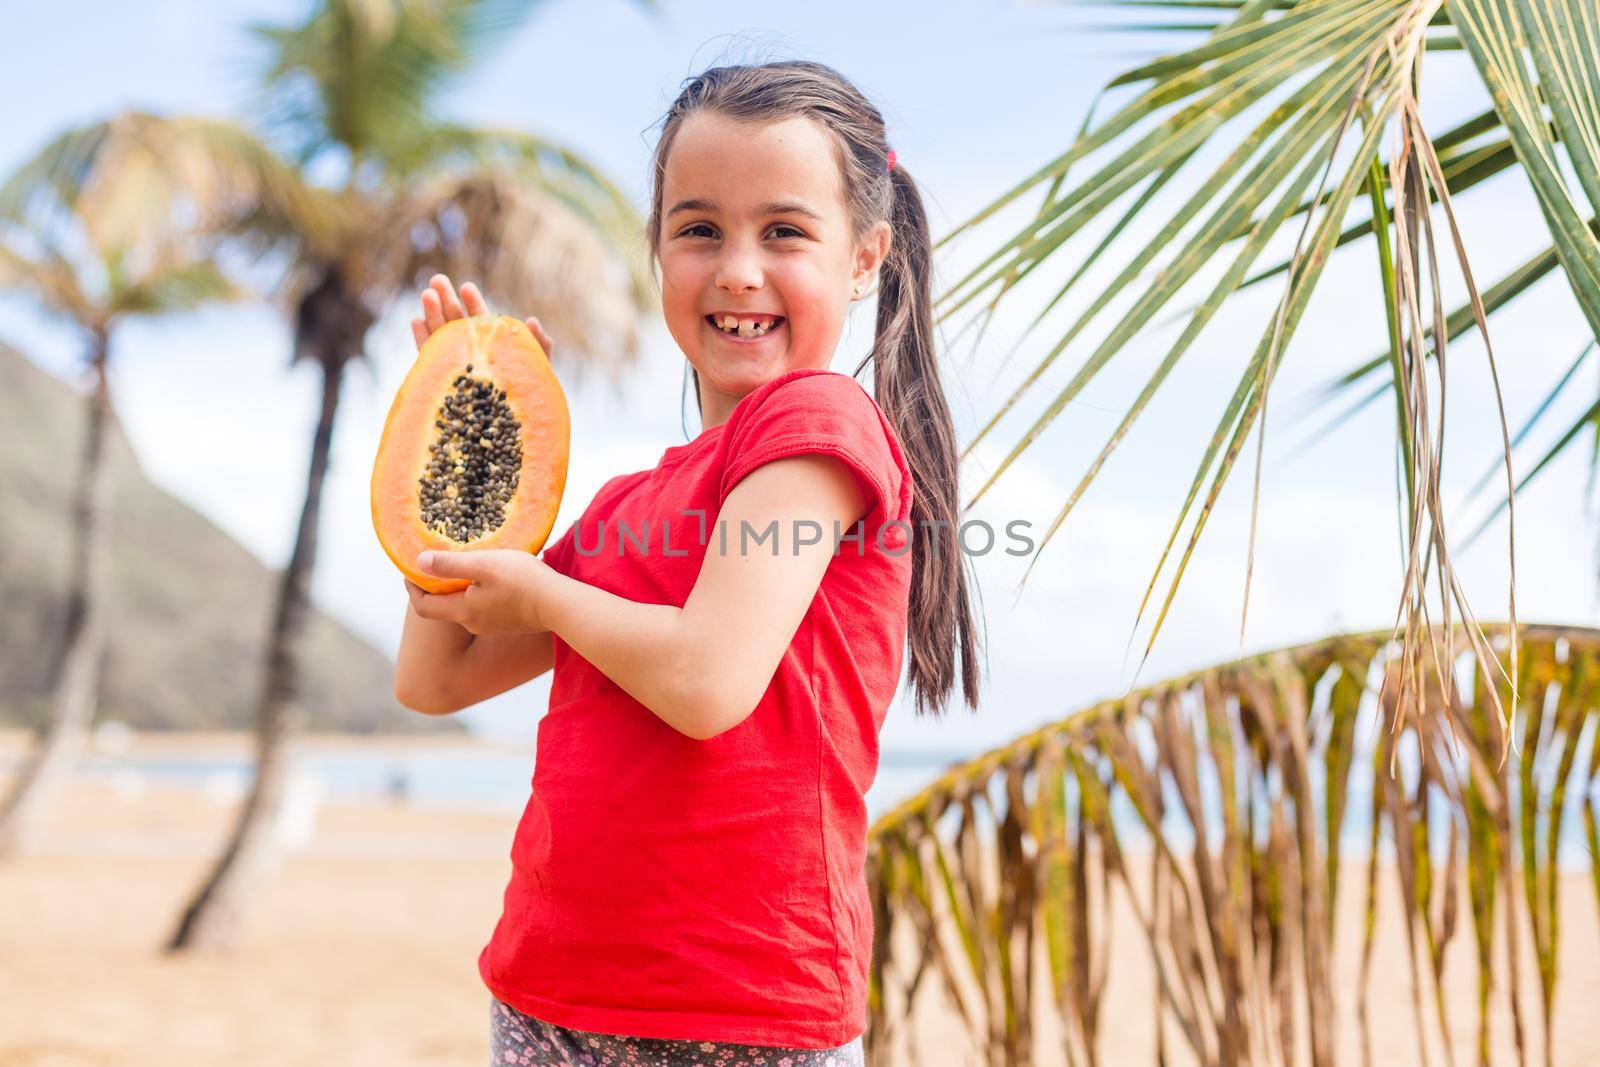 After playing on the sea black sand beach little cute girl picnics of natural vegetarian food - eating a orange slice of fresh ripe papaya, healthy children lifestyle in vacation on tropical island.